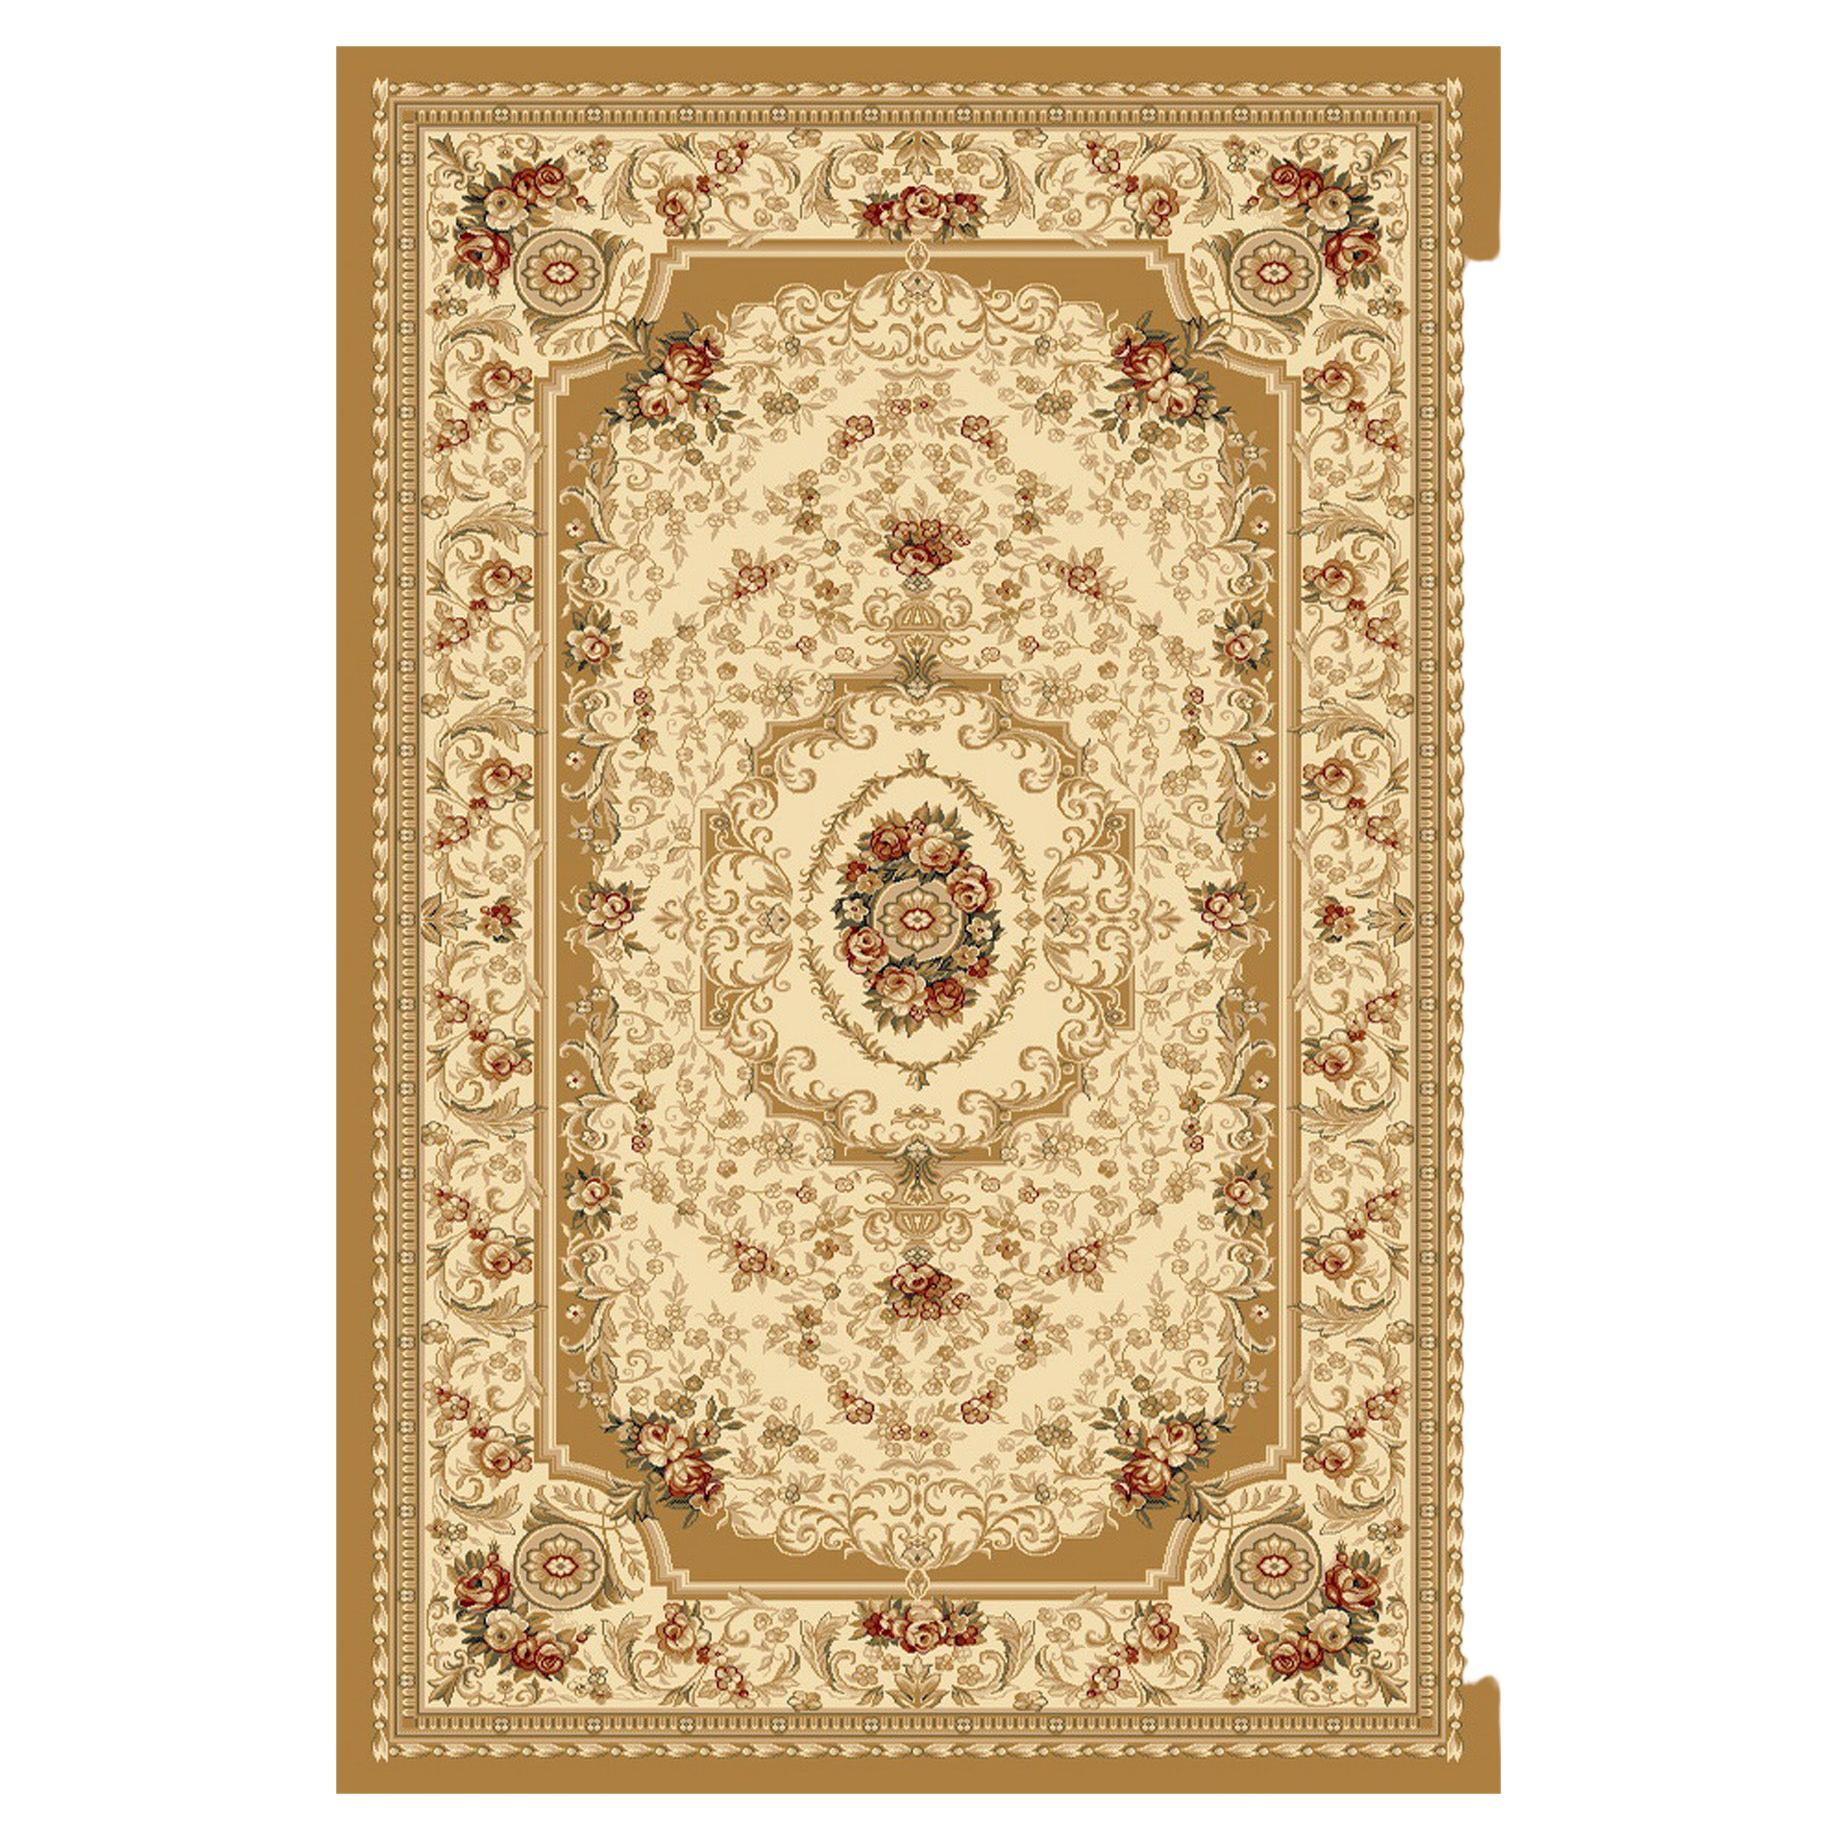 Wonderfully handknotted persian style rug, bespoke production by Modenese Gastone Luxury Interiors guaranteeing best quality fibers. Bold border white stripes with roses pattern result in a pleasant, high-end and soft floor decoration for your